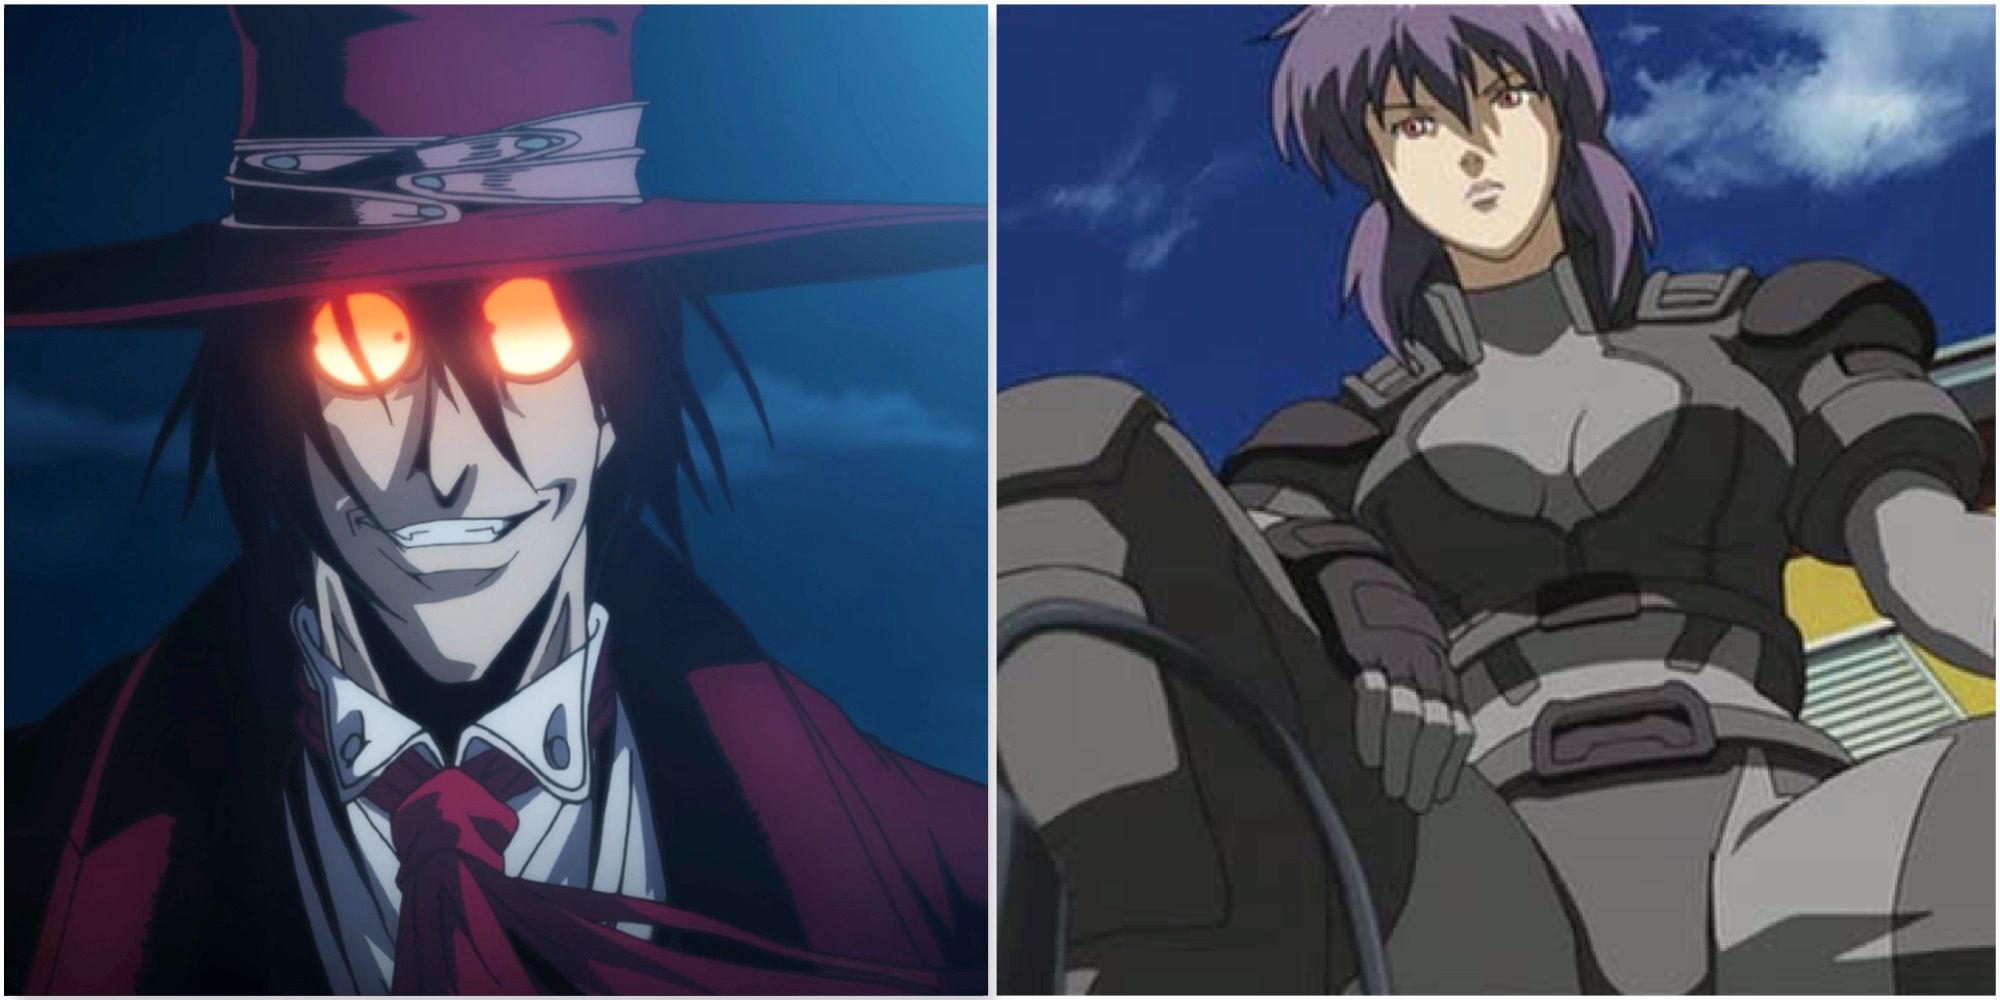 Alucard in Hellsing Ultimate and Motoko in Ghost in the Shell